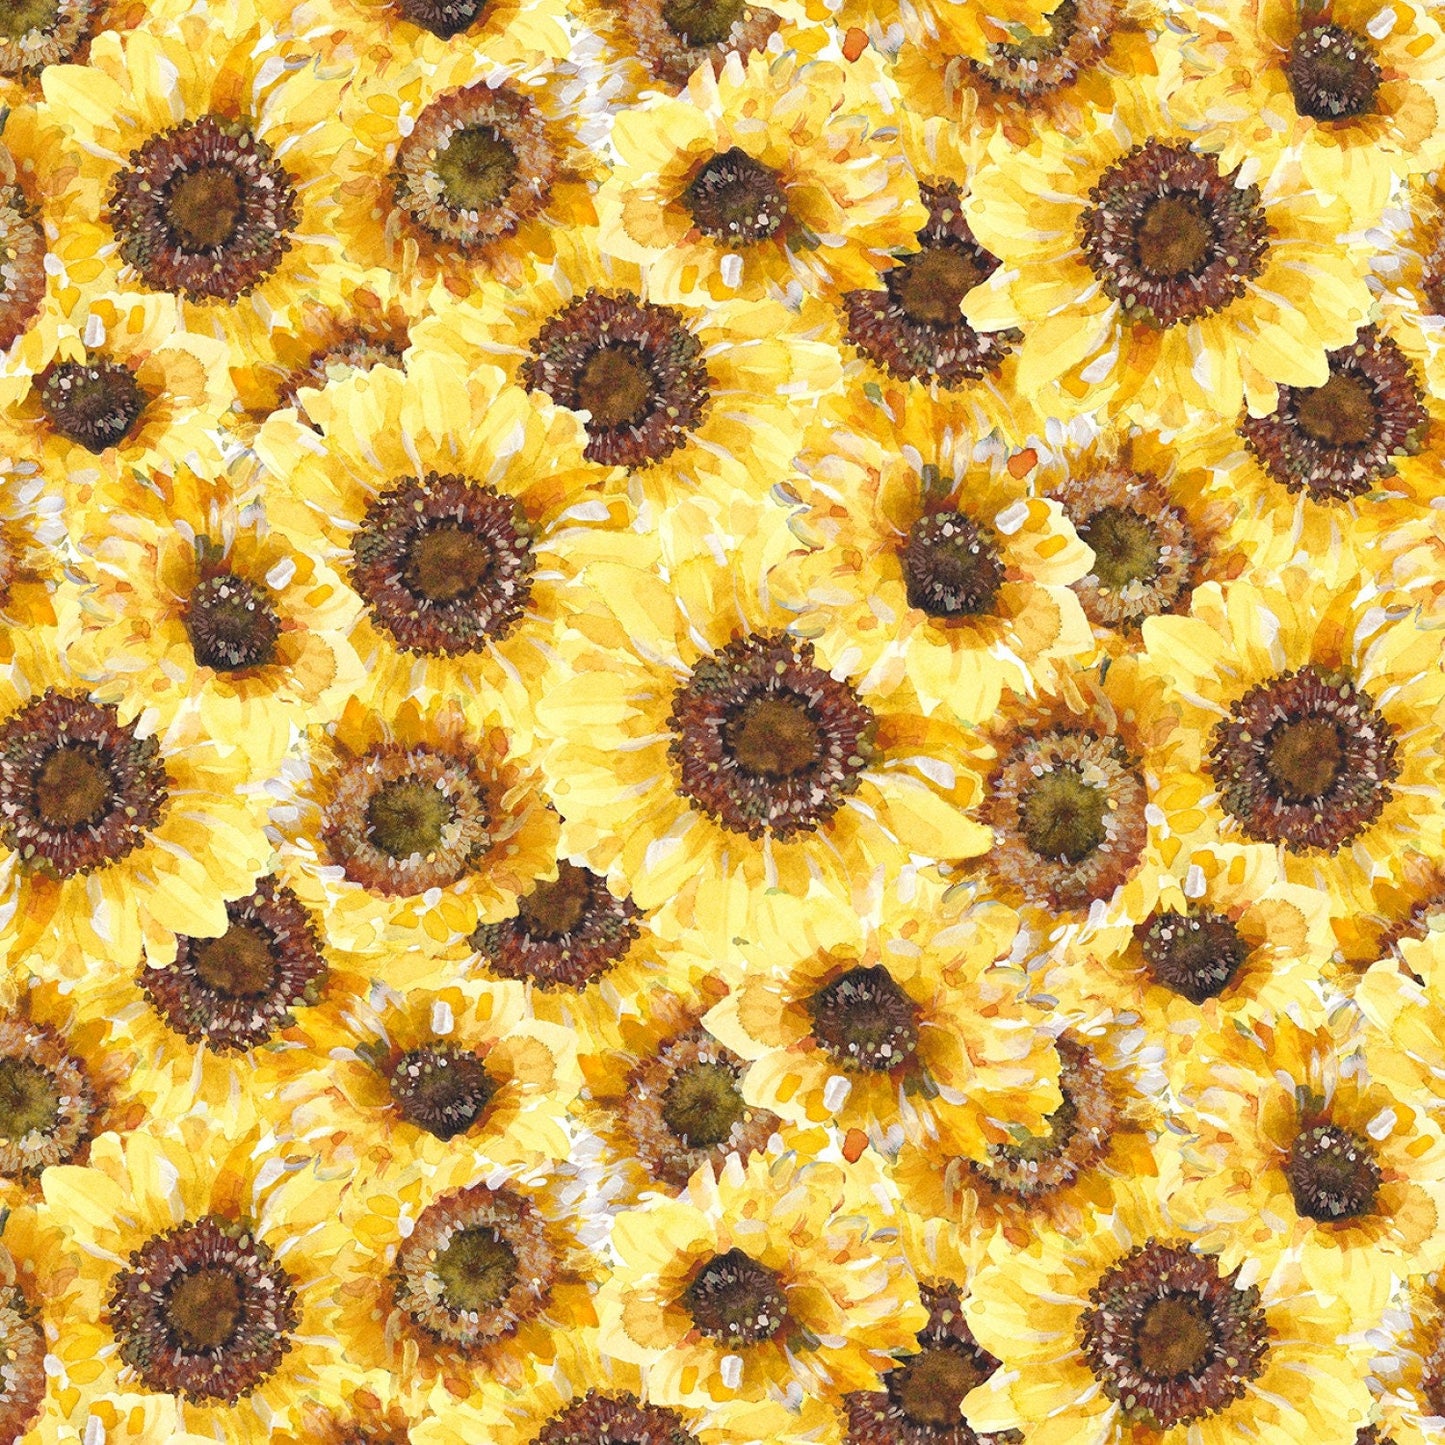 Sunflower Fabric - Sunflower Sweet by Lisa Audit for Wilmington - NEW - 100% Cotton Fabric by the yard - Bicycle fabric - SHIPS NEXT Day